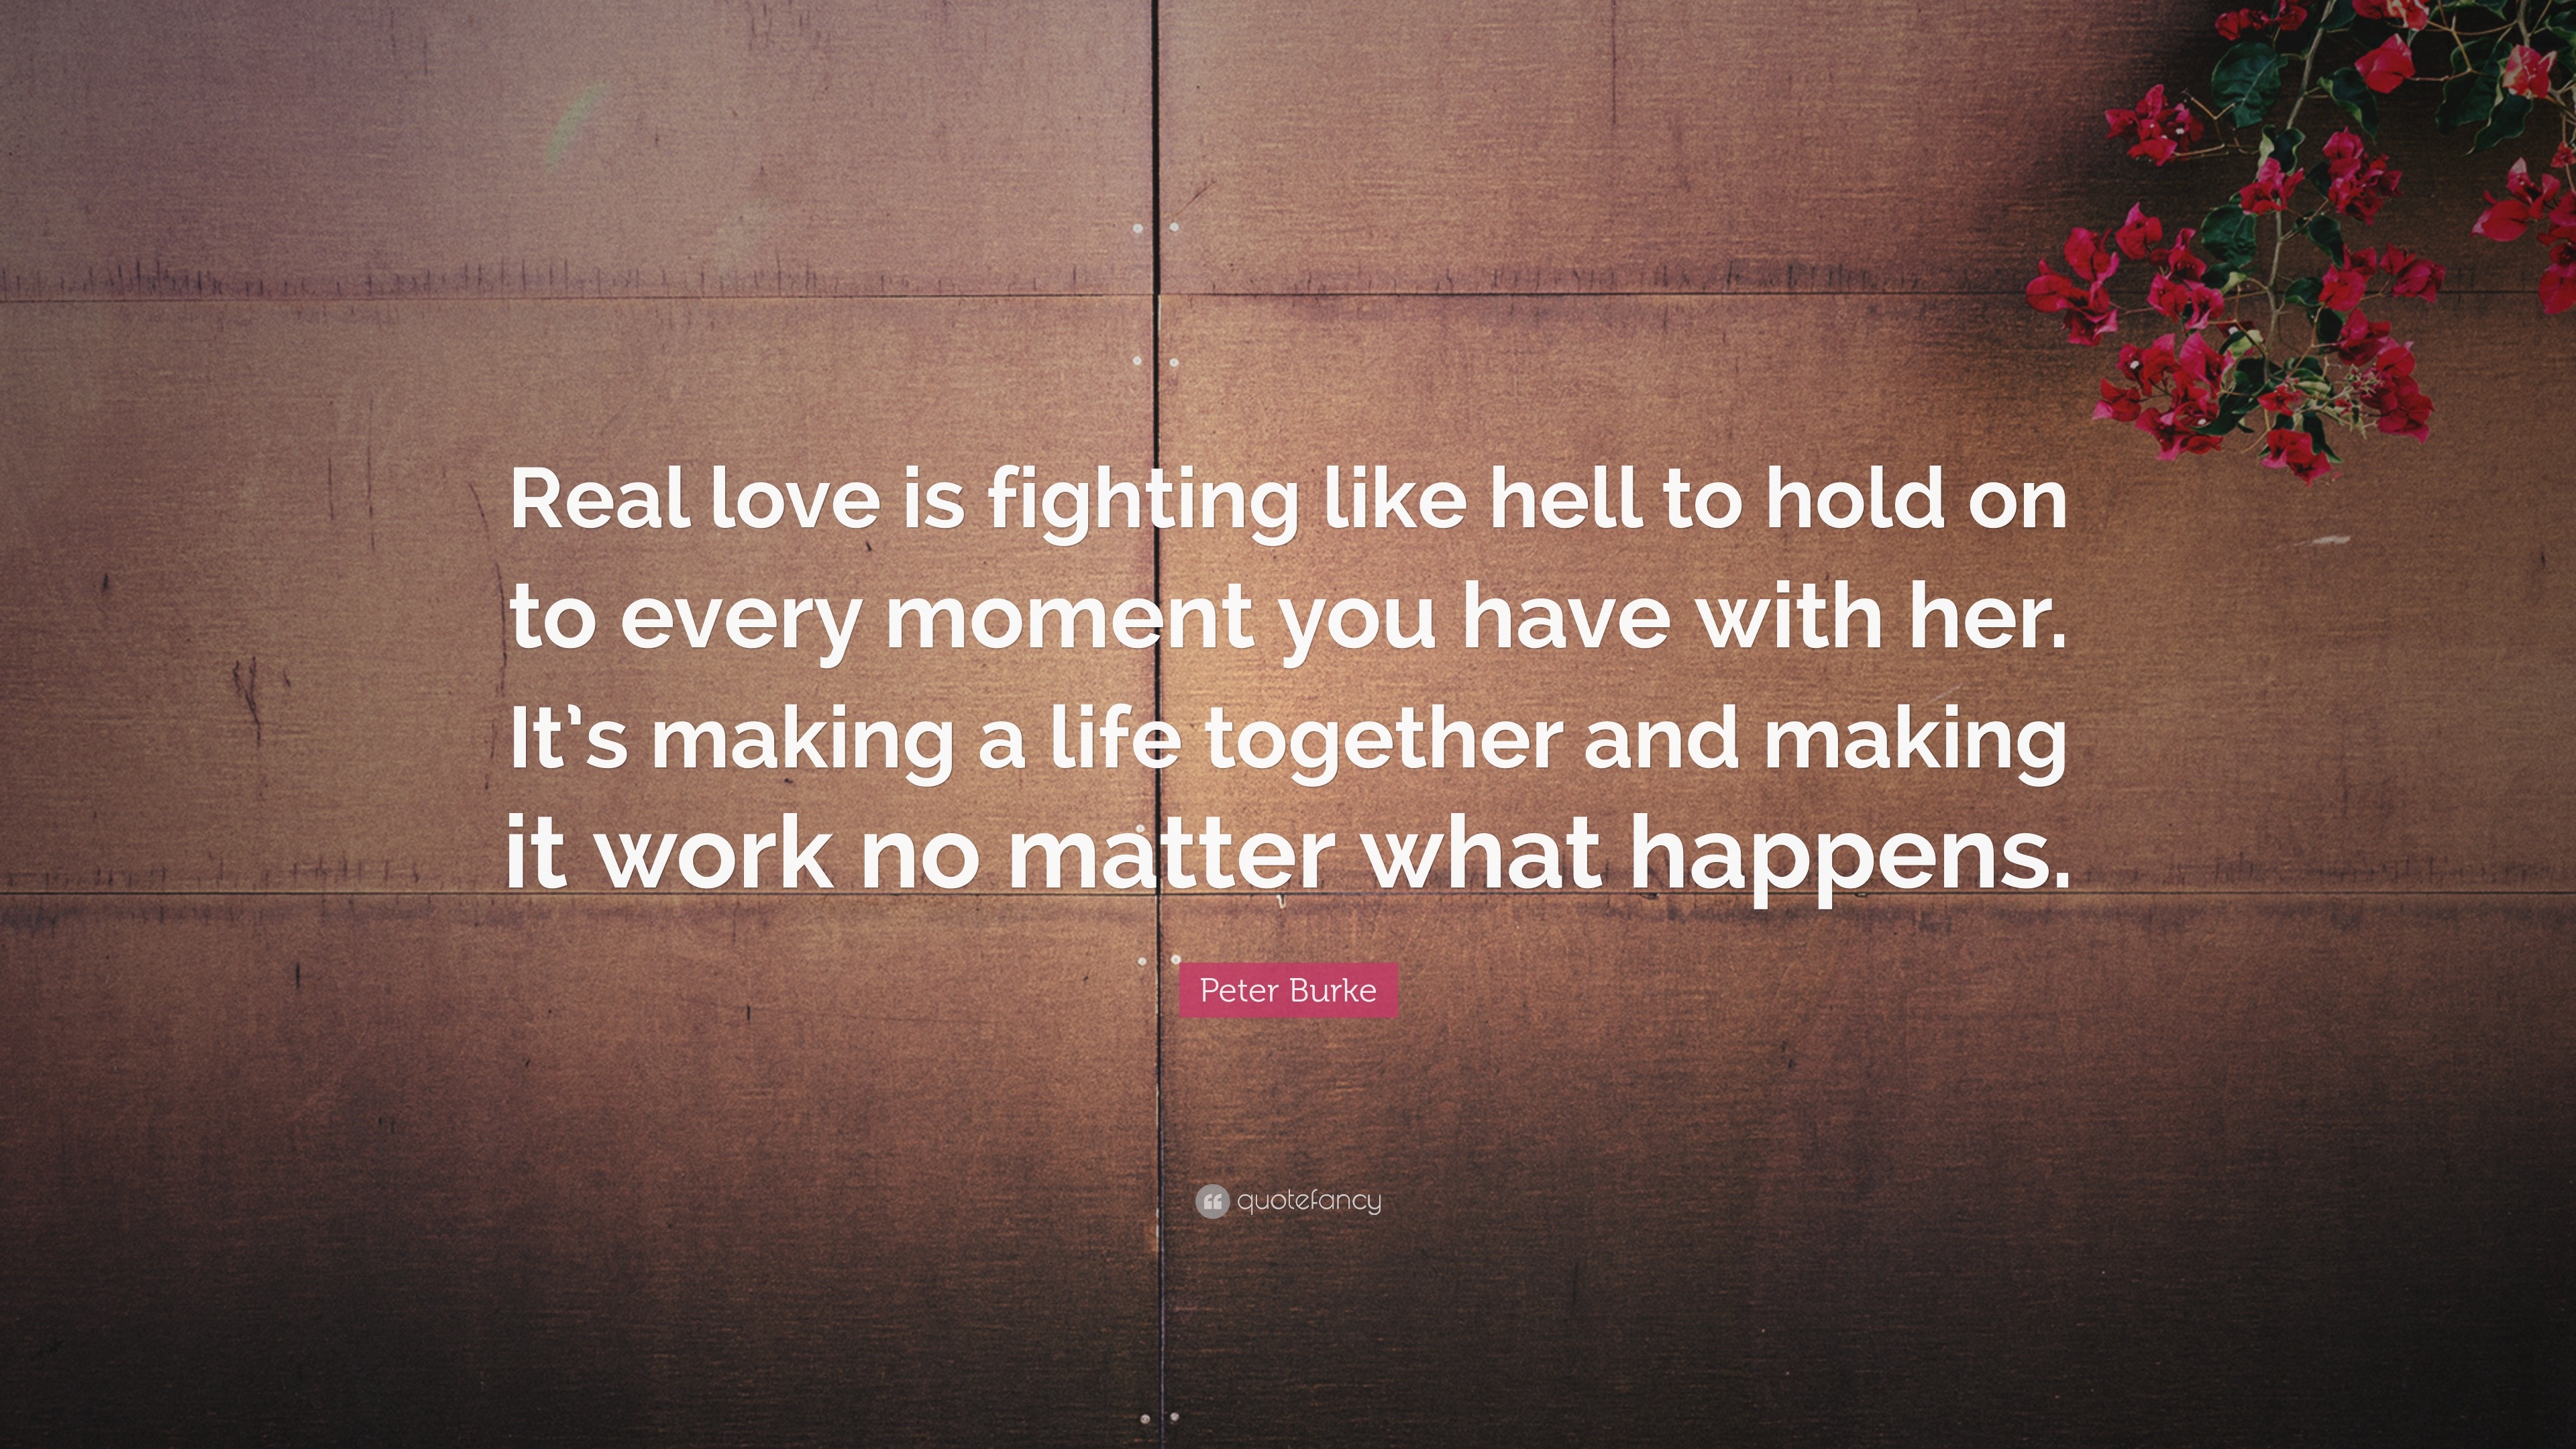 Peter Burke Quote “Real love is fighting like hell to hold on to every